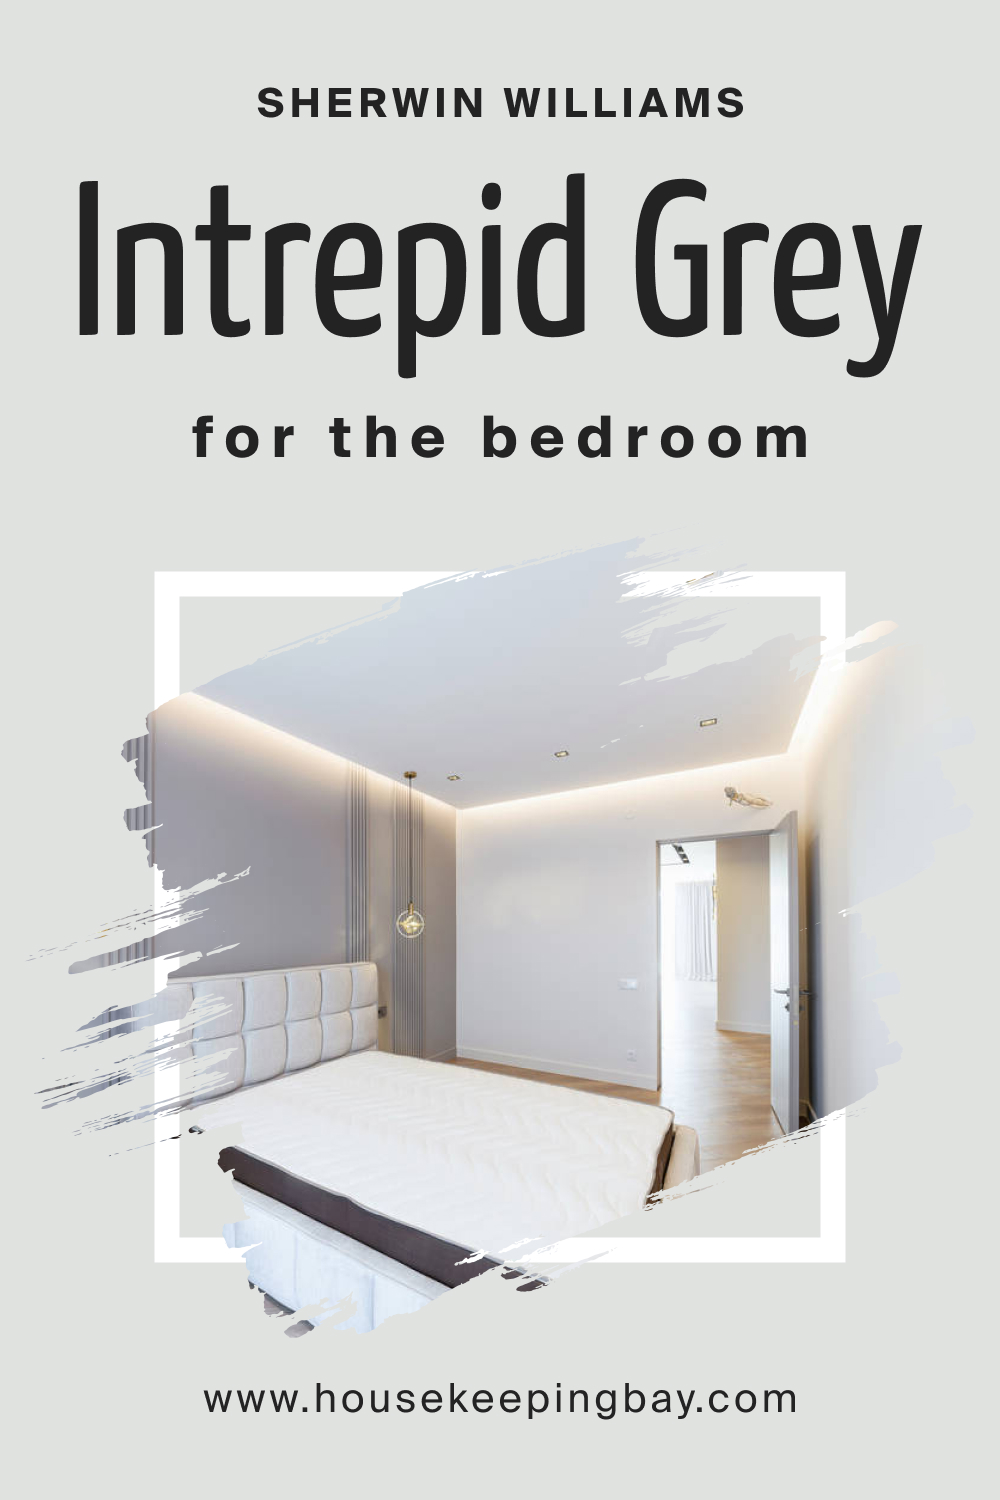 Sherwin Williams. SW 9556 Intrepid Grey For the bedroom